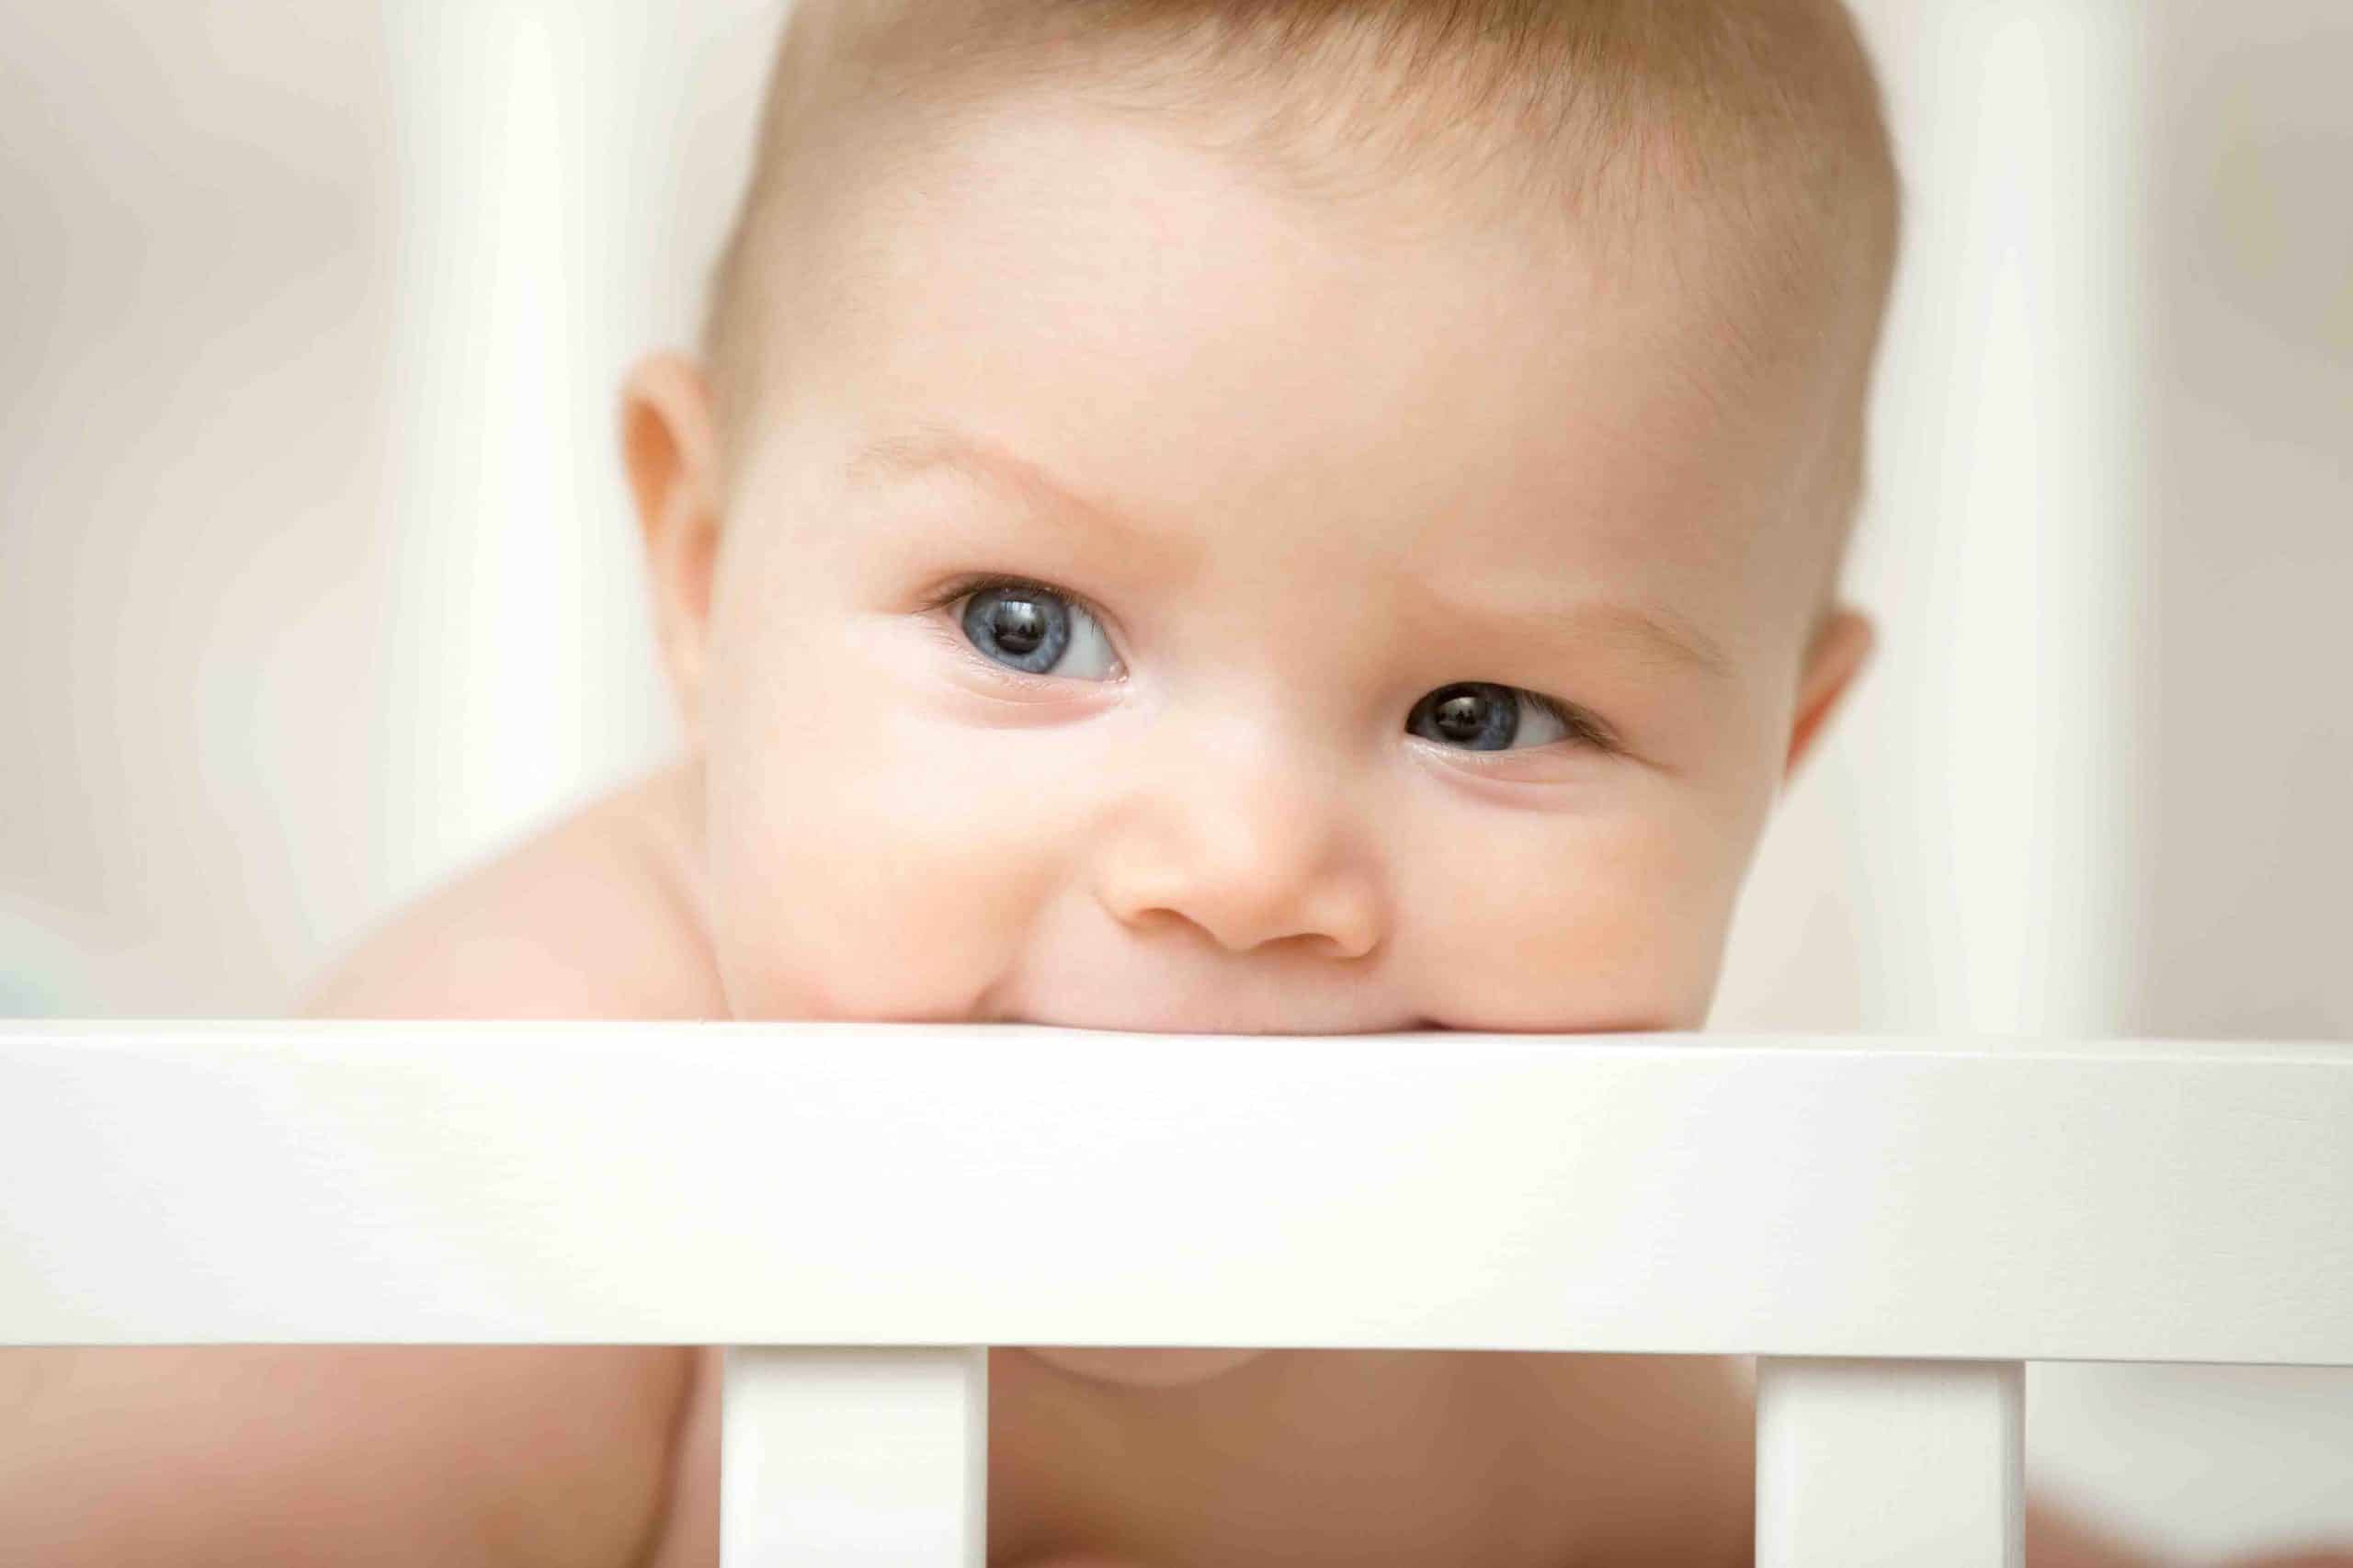 10 Must-Haves For Your Baby’s Nursery - Start Early!